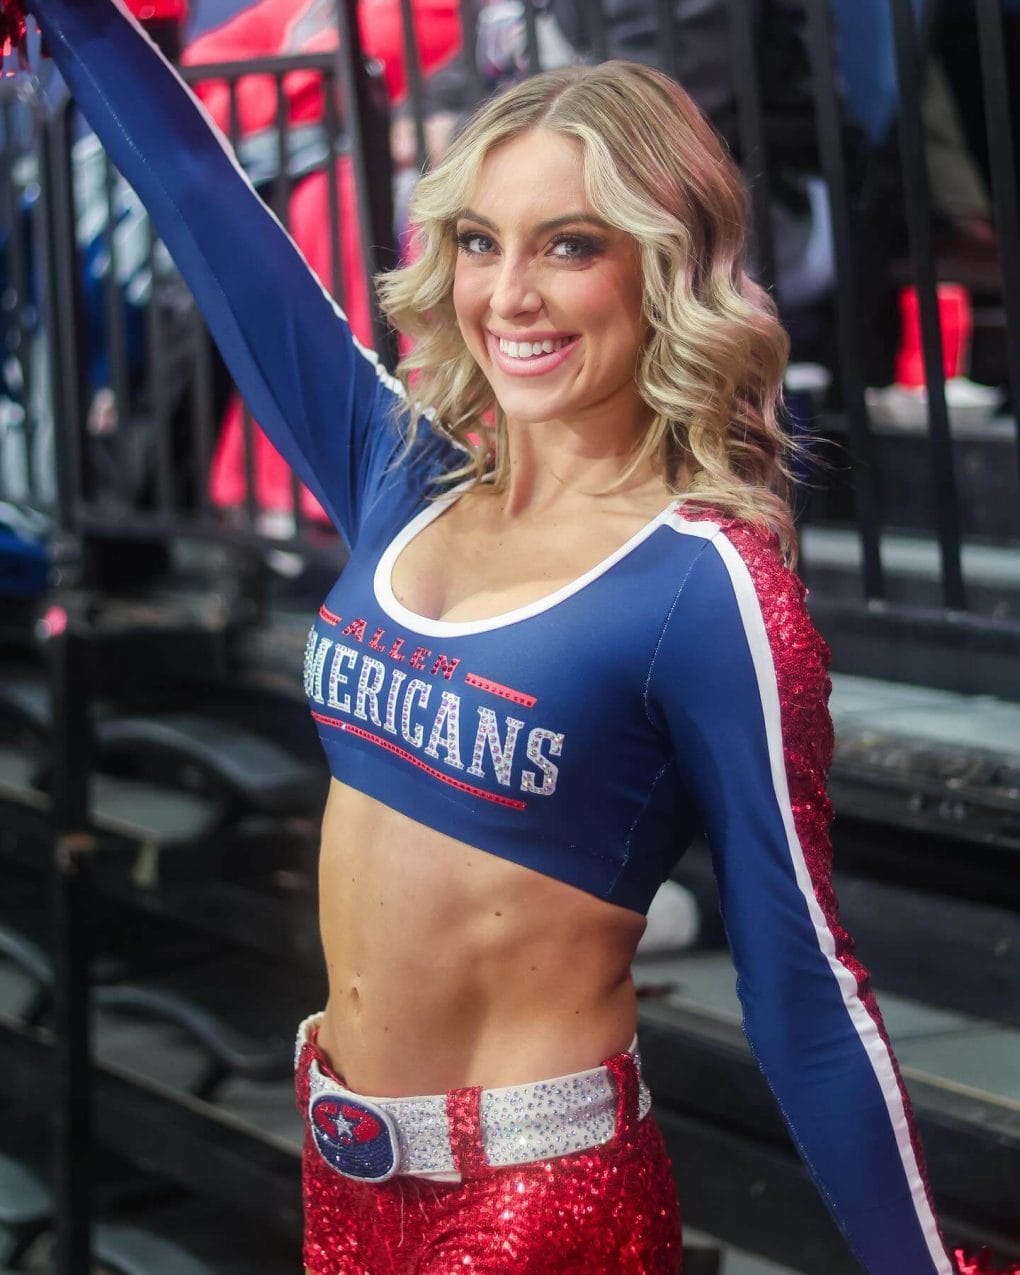 Blonde cheerleader with voluminous curls and side part